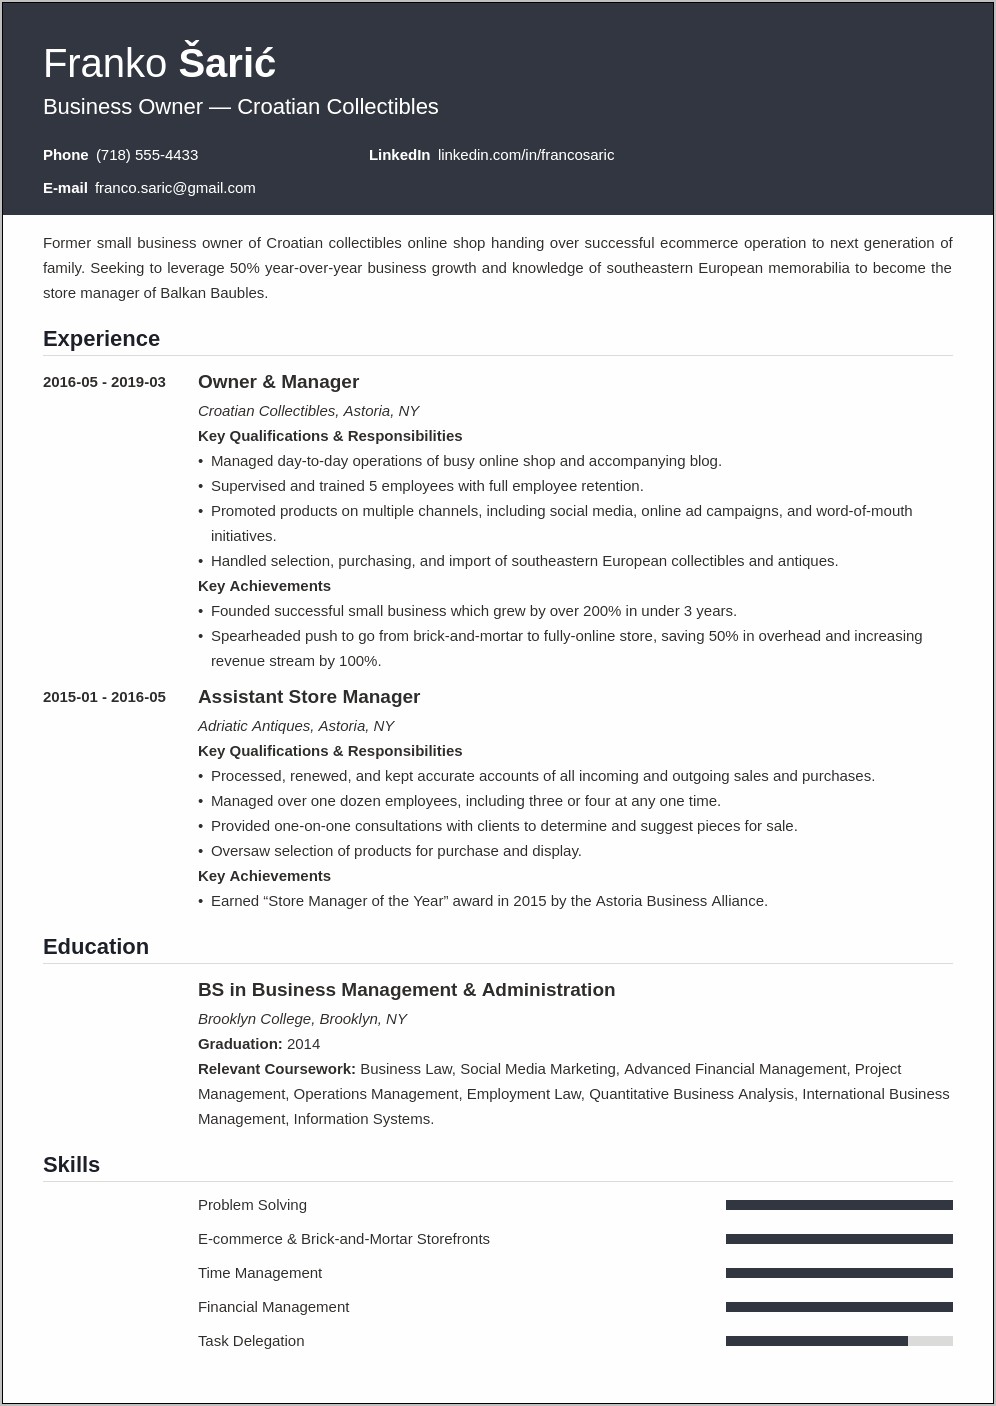 Profile Resume Examples For Business